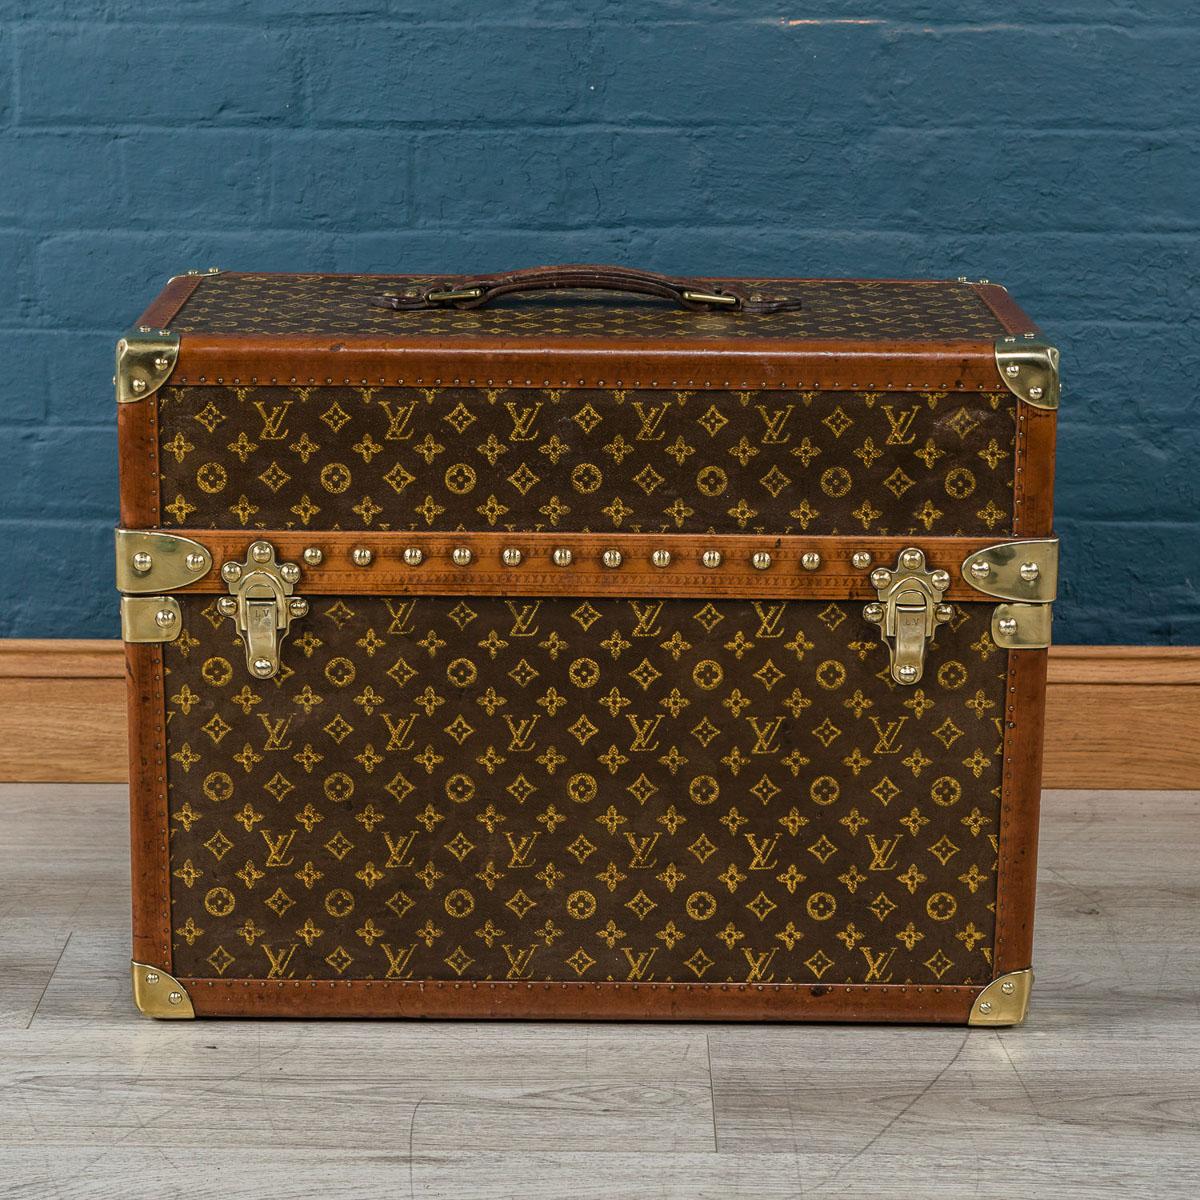 French 20th Century Extremely Rare Louis Vuitton Hemingway Trunk, circa 1935